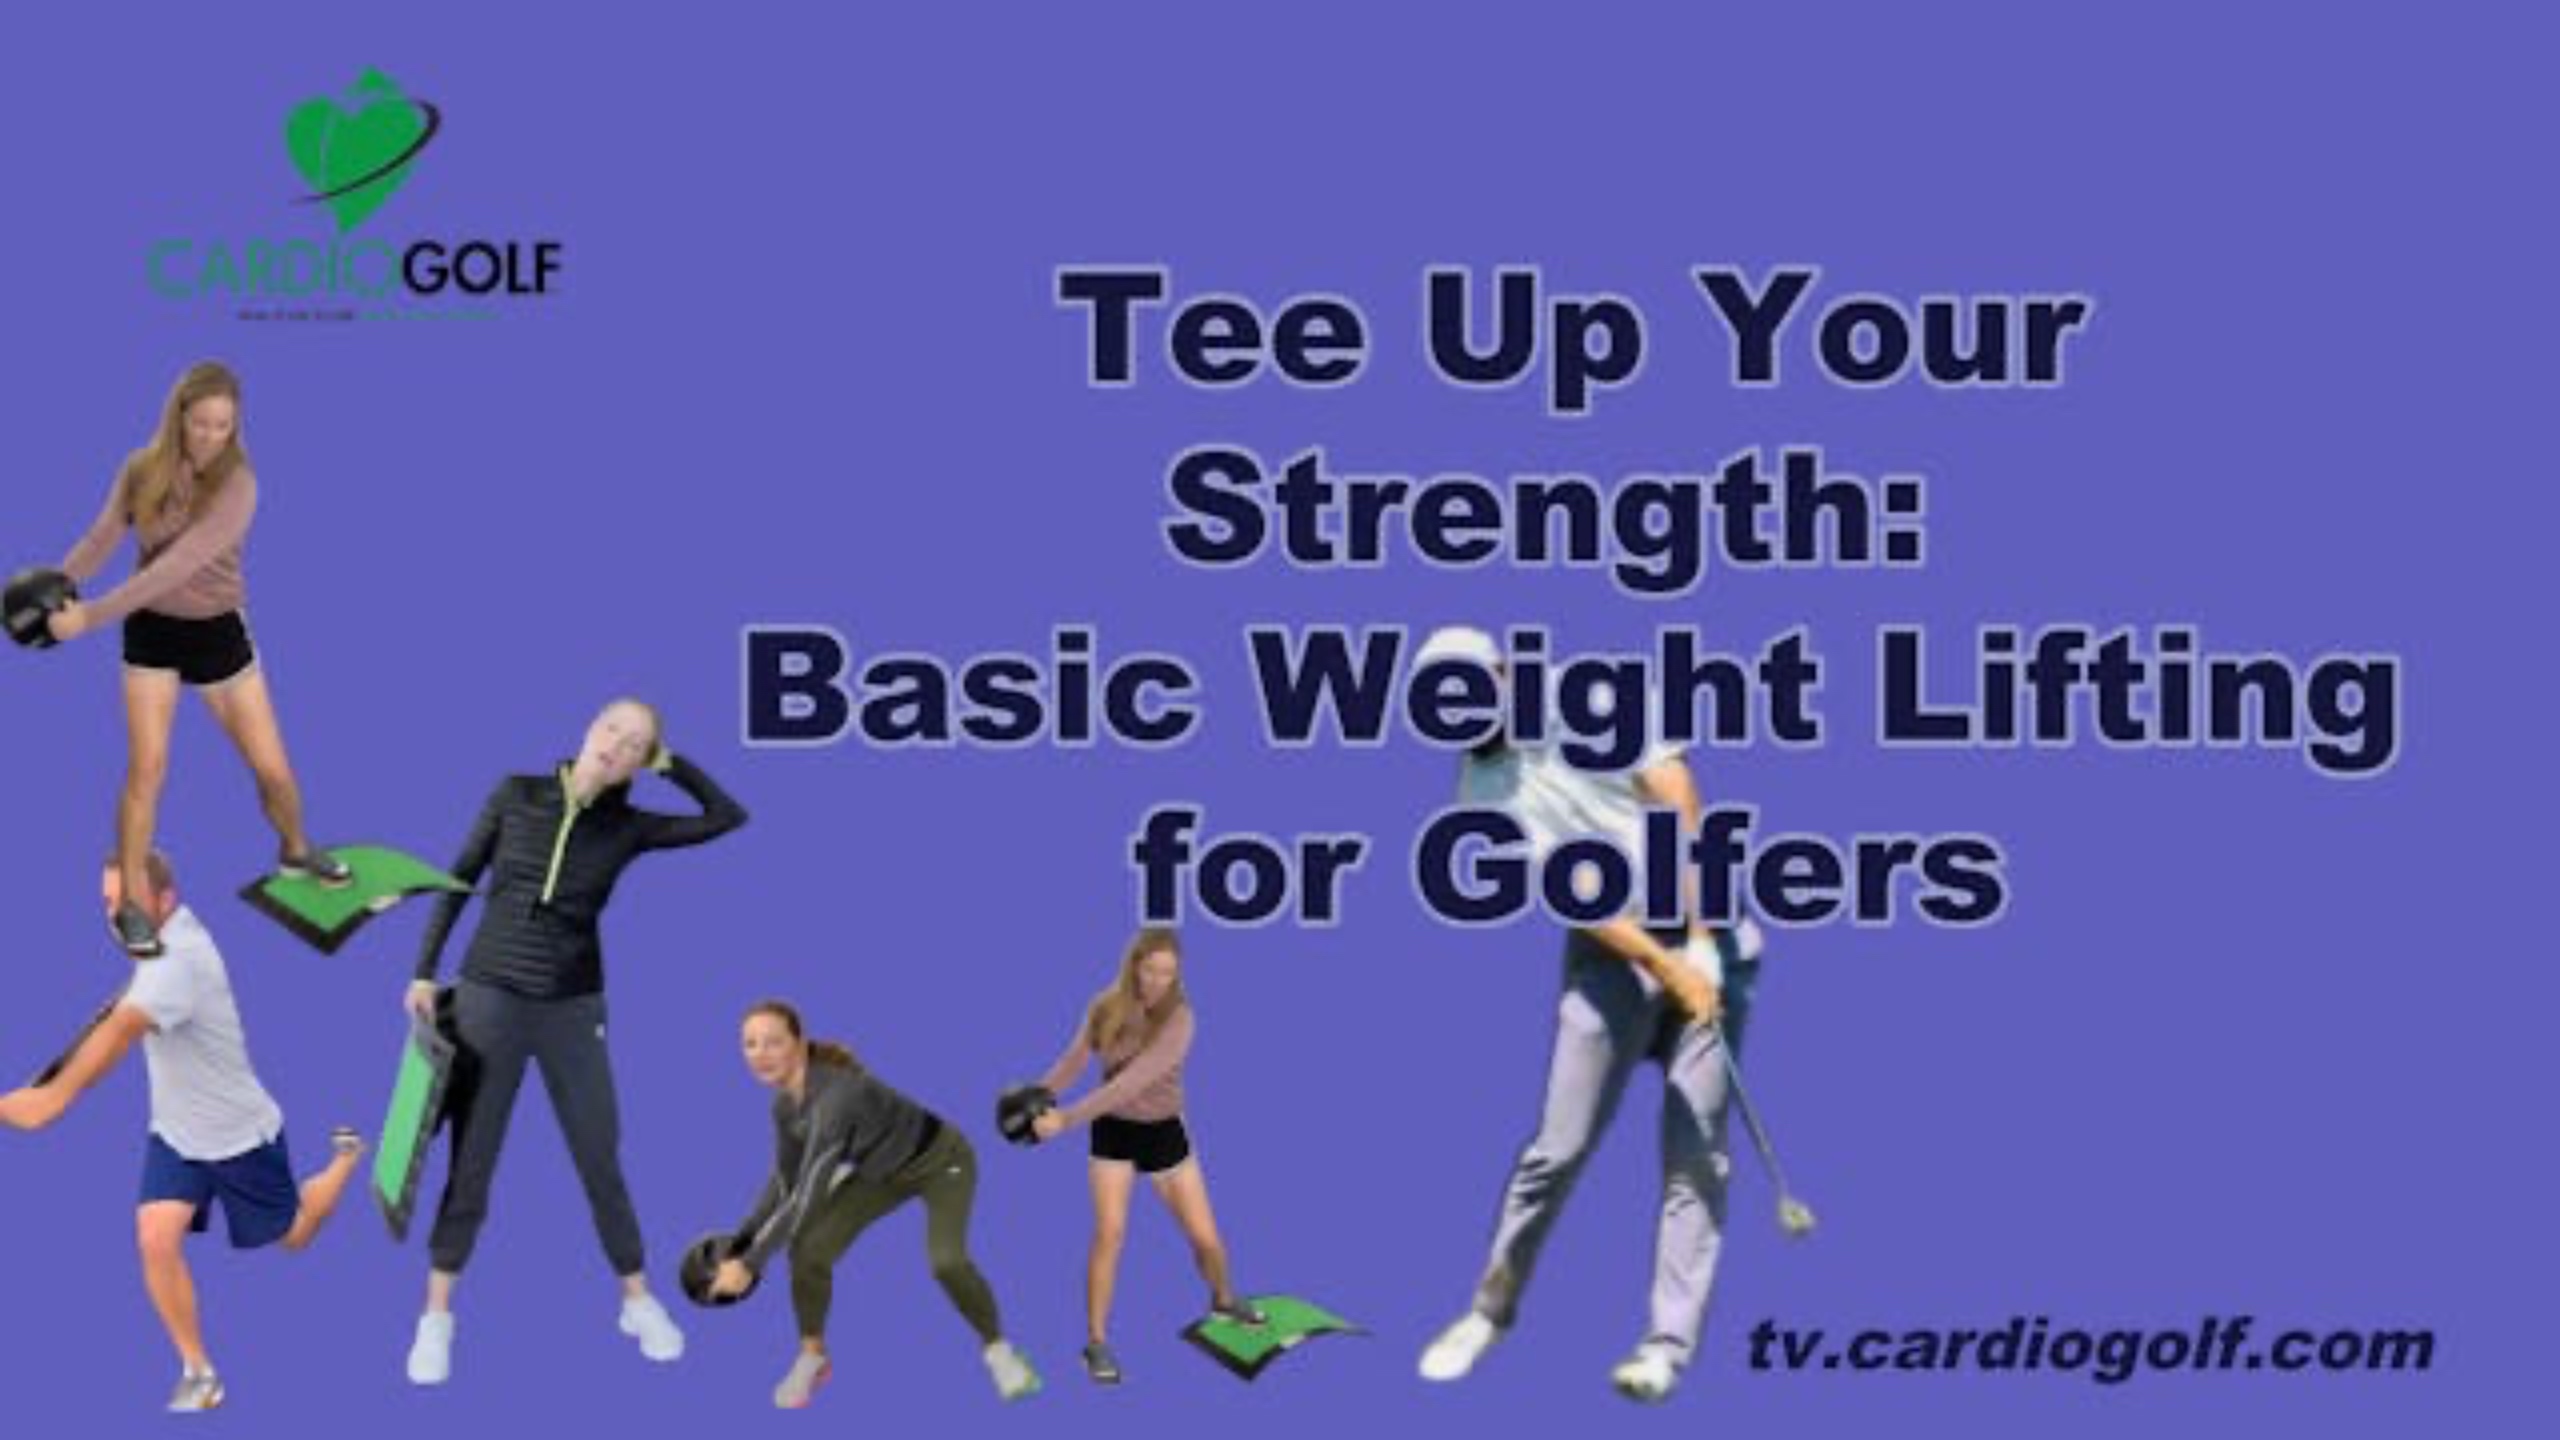 Tee Up Your Strength: Weight Lifting for Golfers. CardioGolf.com